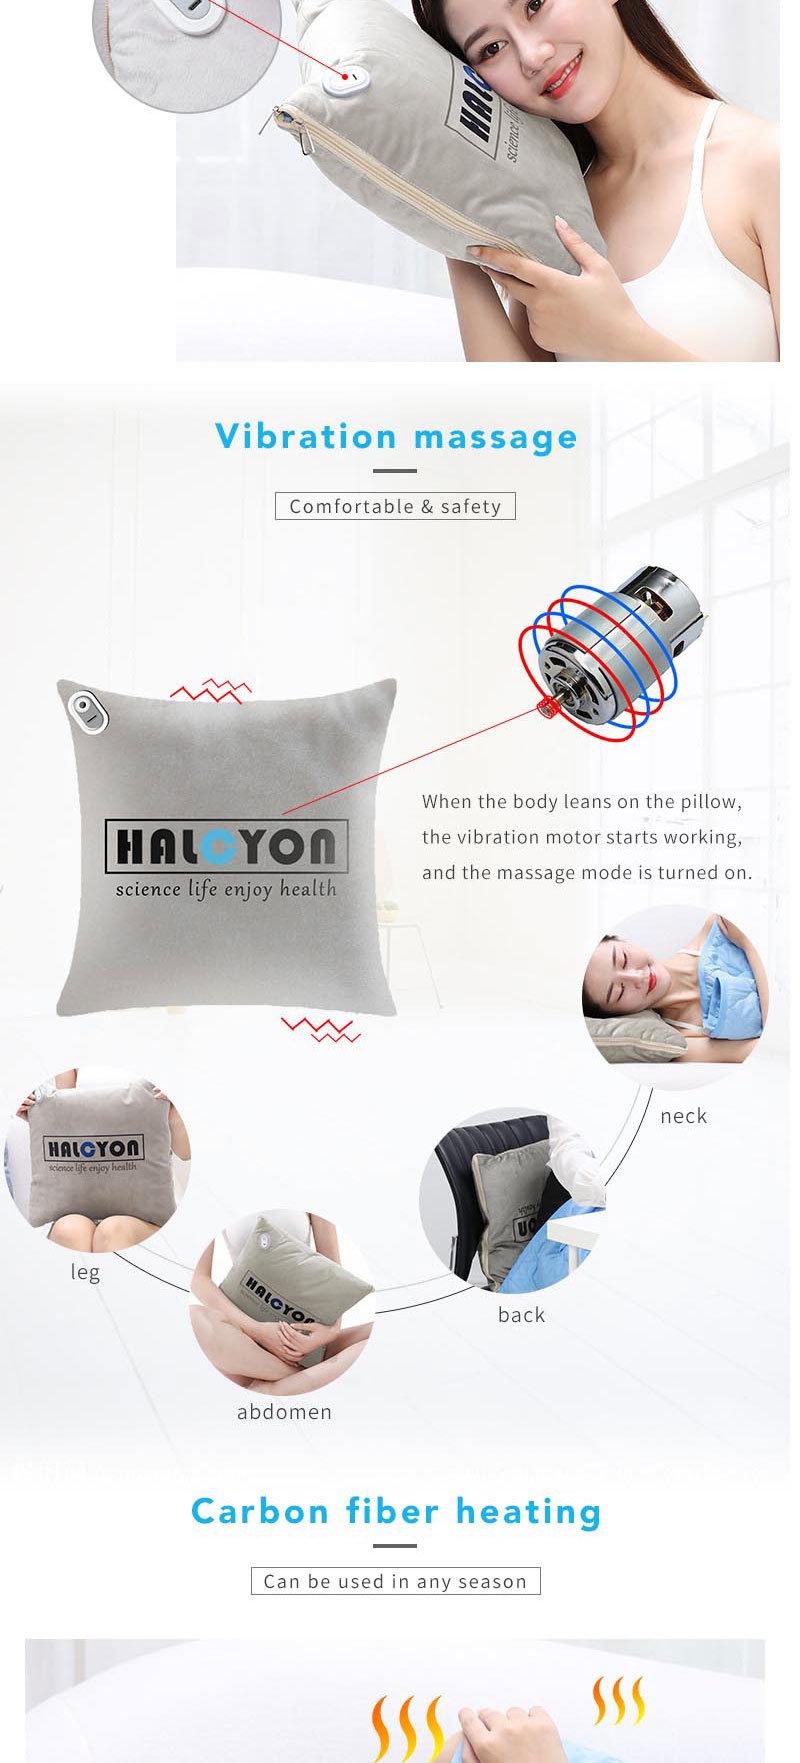 Hezheng Practical Useful 2 in 1 with Zipper Foldable Pillow Blanket Massager